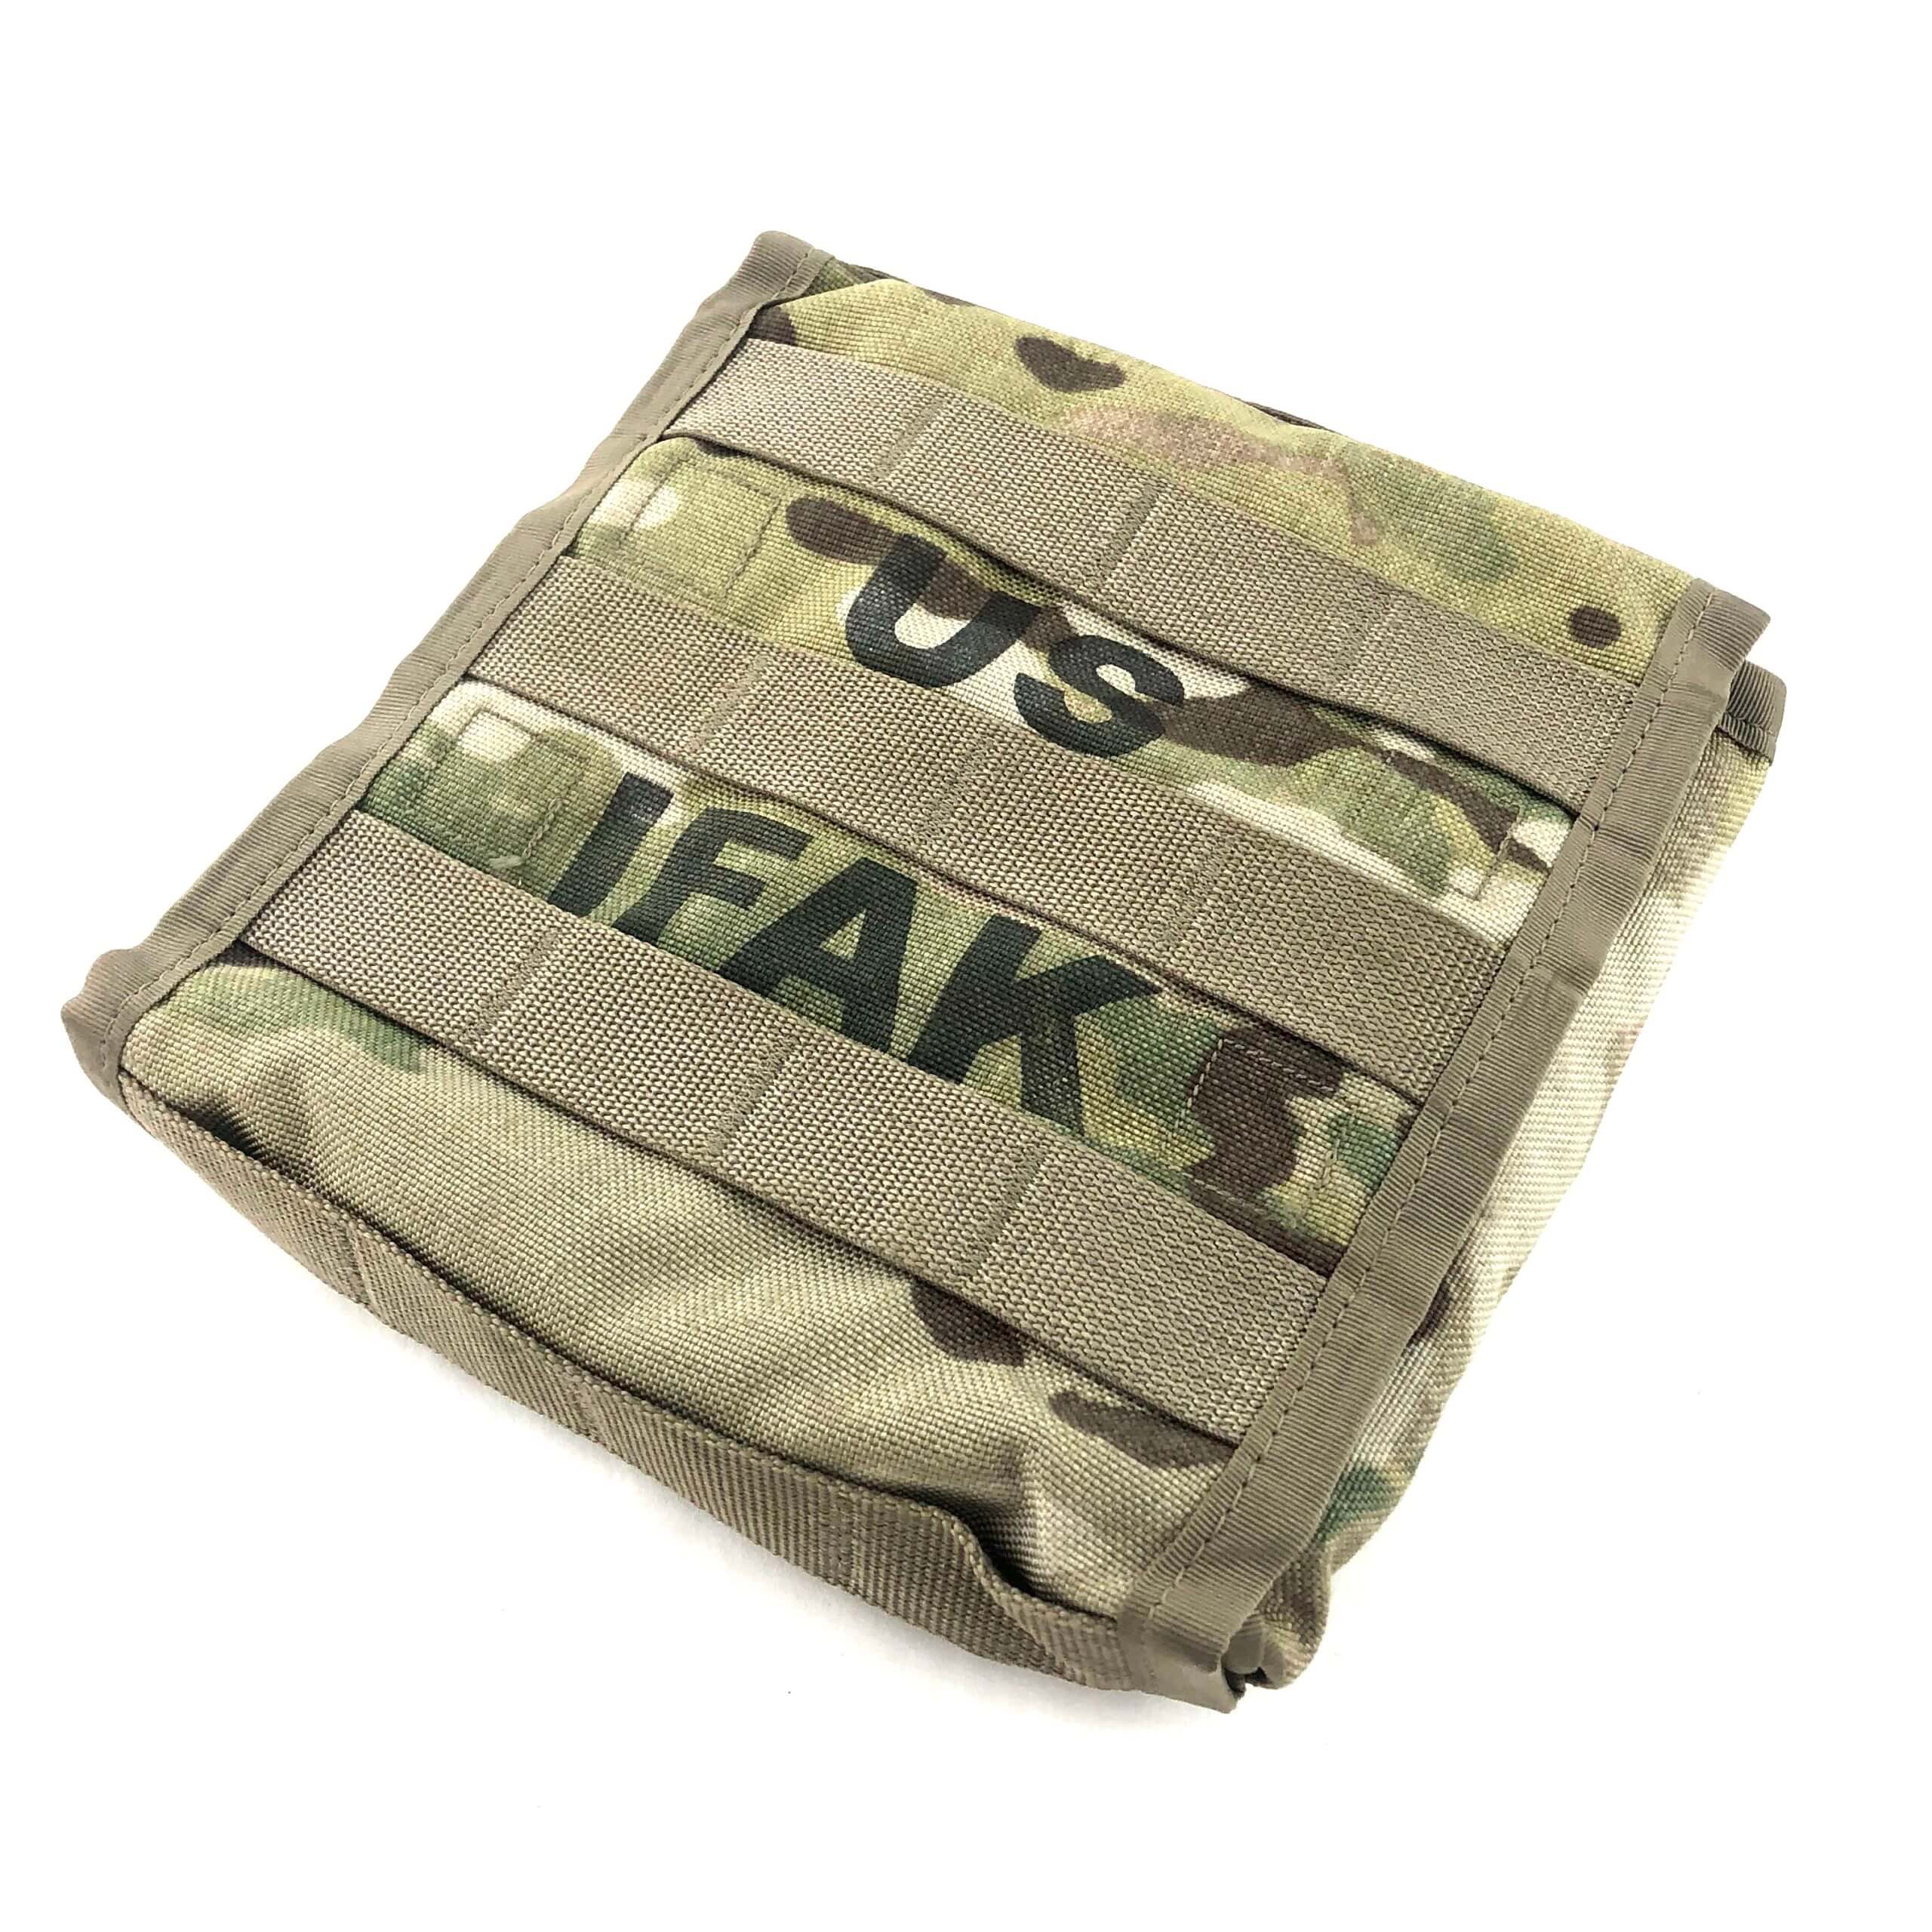 SPECTER GEAR 280 MULTICAM MOLLE MED GENERAL PURPOSE GP POUCH IFAK US MILITARY 